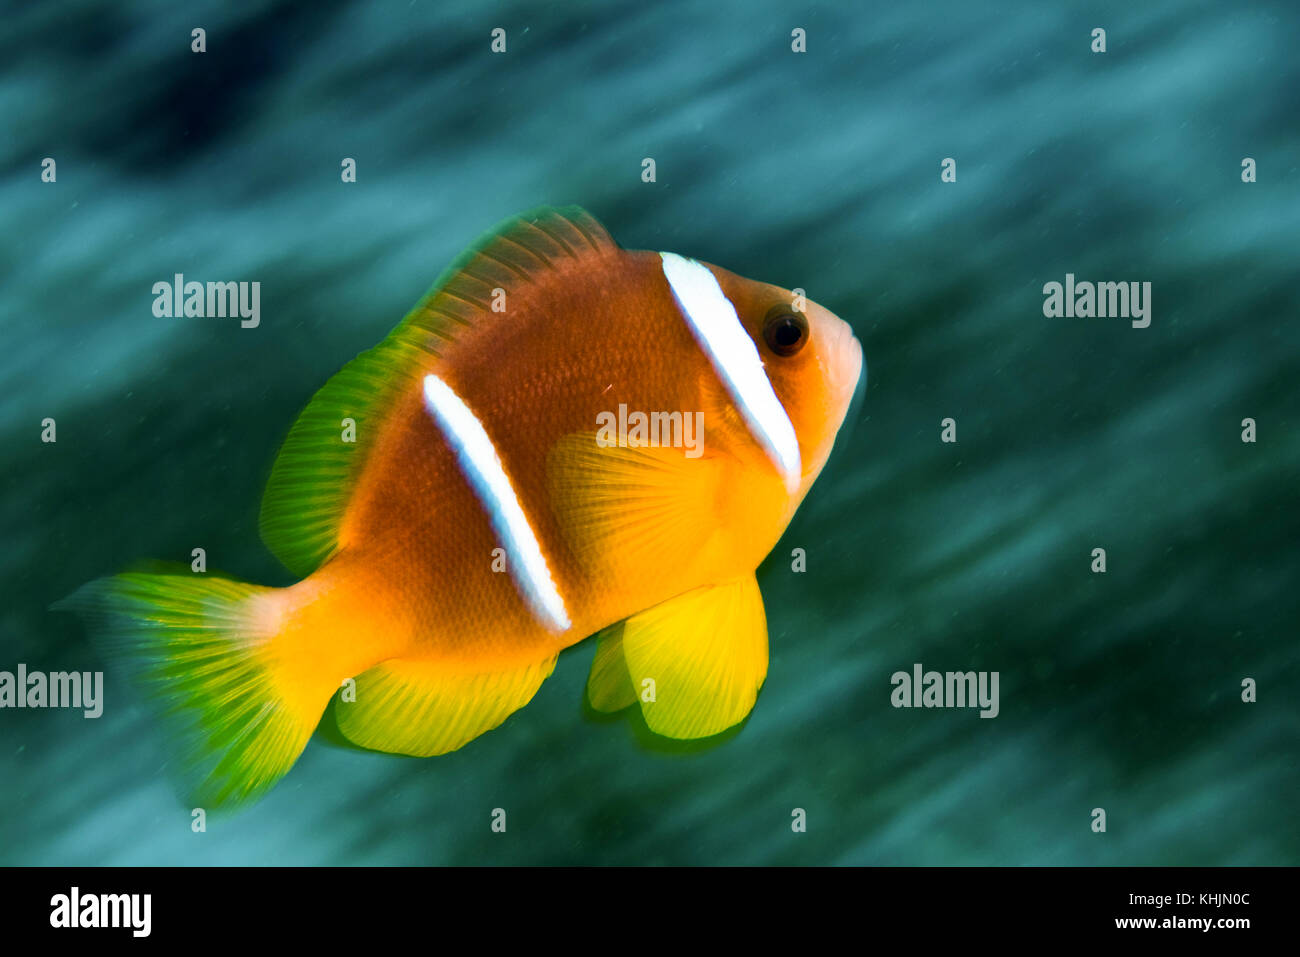 Israel, Eilat, Red Sea, – Underwater photograph of a Red Sea or two-banded clownfish (Amphiprion bicinctus) Stock Photo